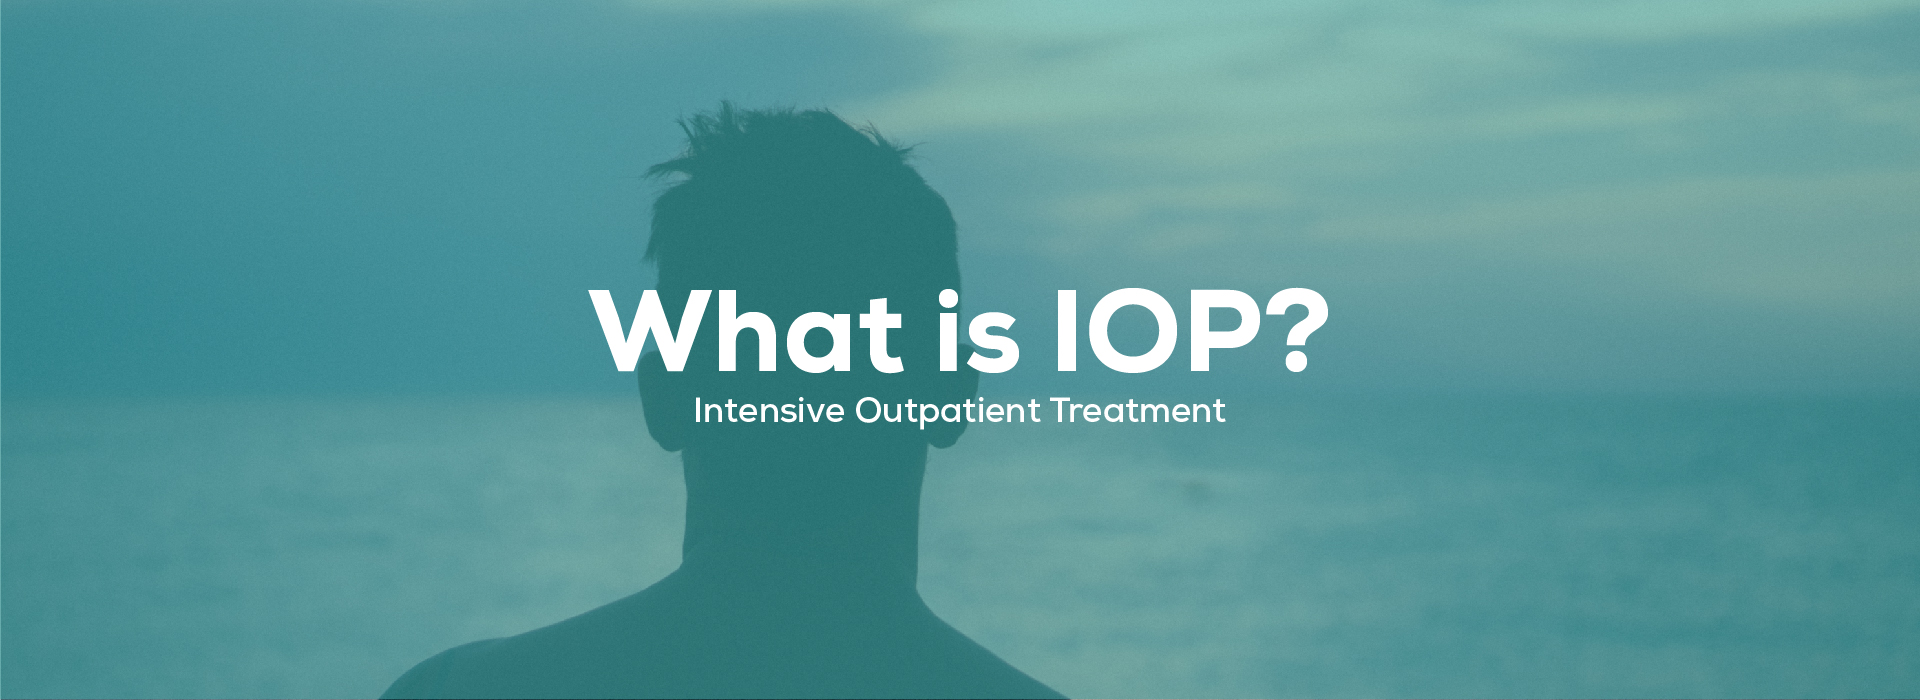 What is IOP